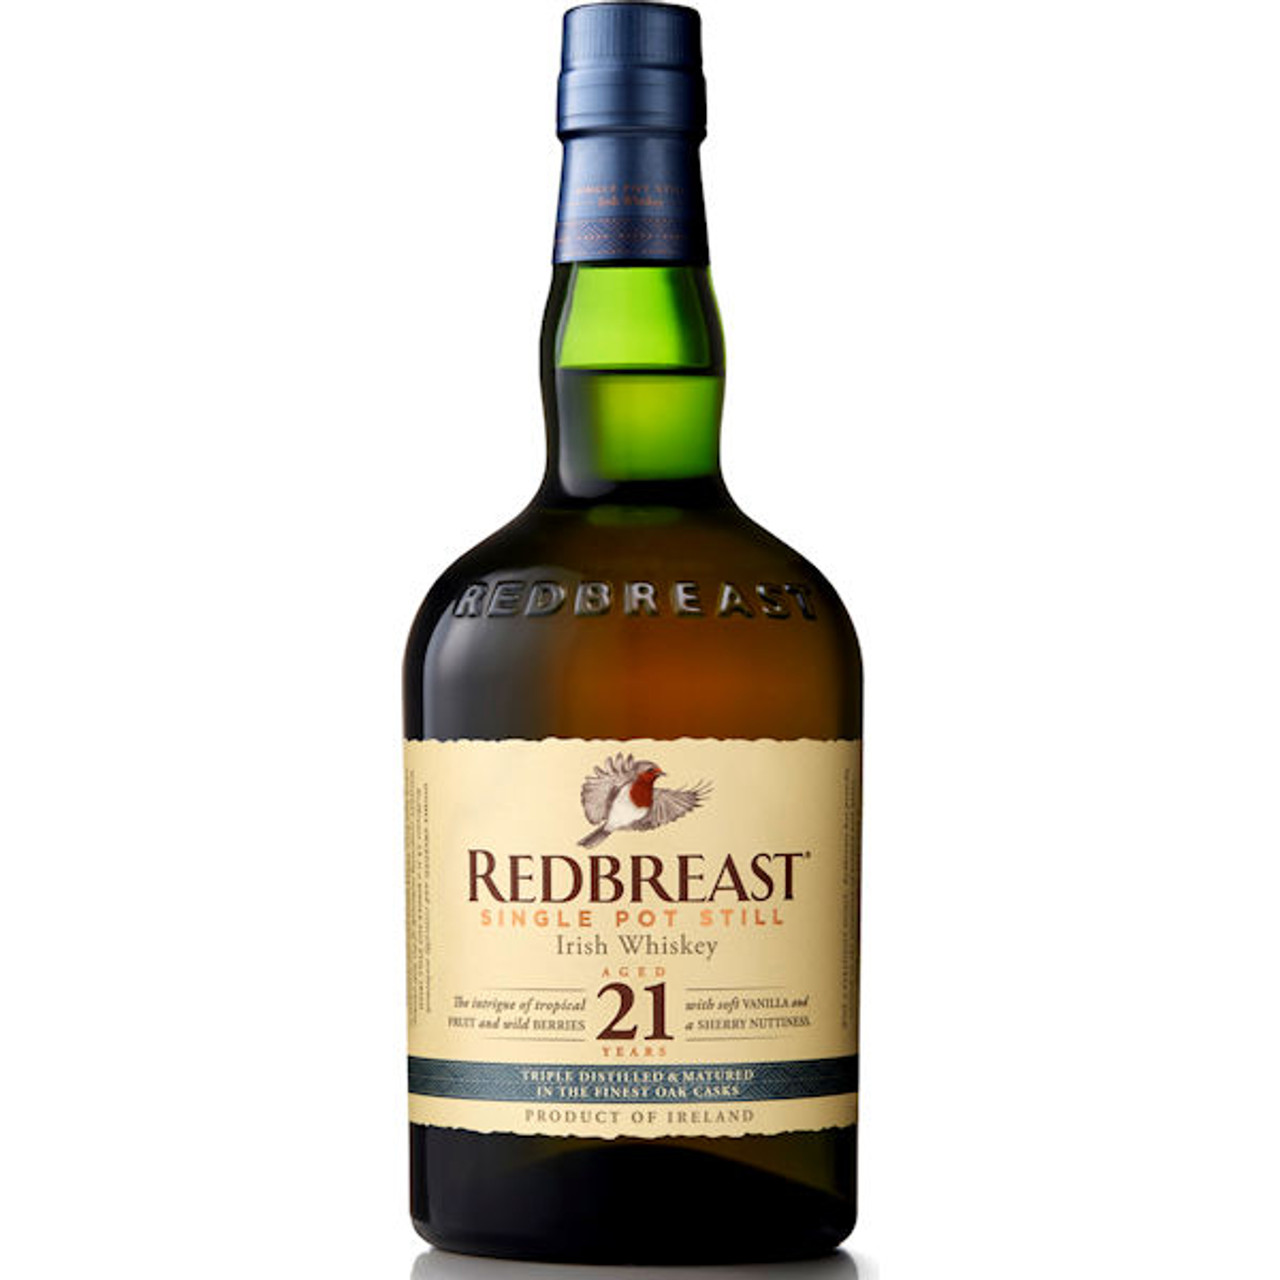 https://cdn11.bigcommerce.com/s-a04d0/images/stencil/1280x1280/products/10257/10752/redbreast-21-year-old-irish-whiskey__66296.1661917632.jpg?c=2